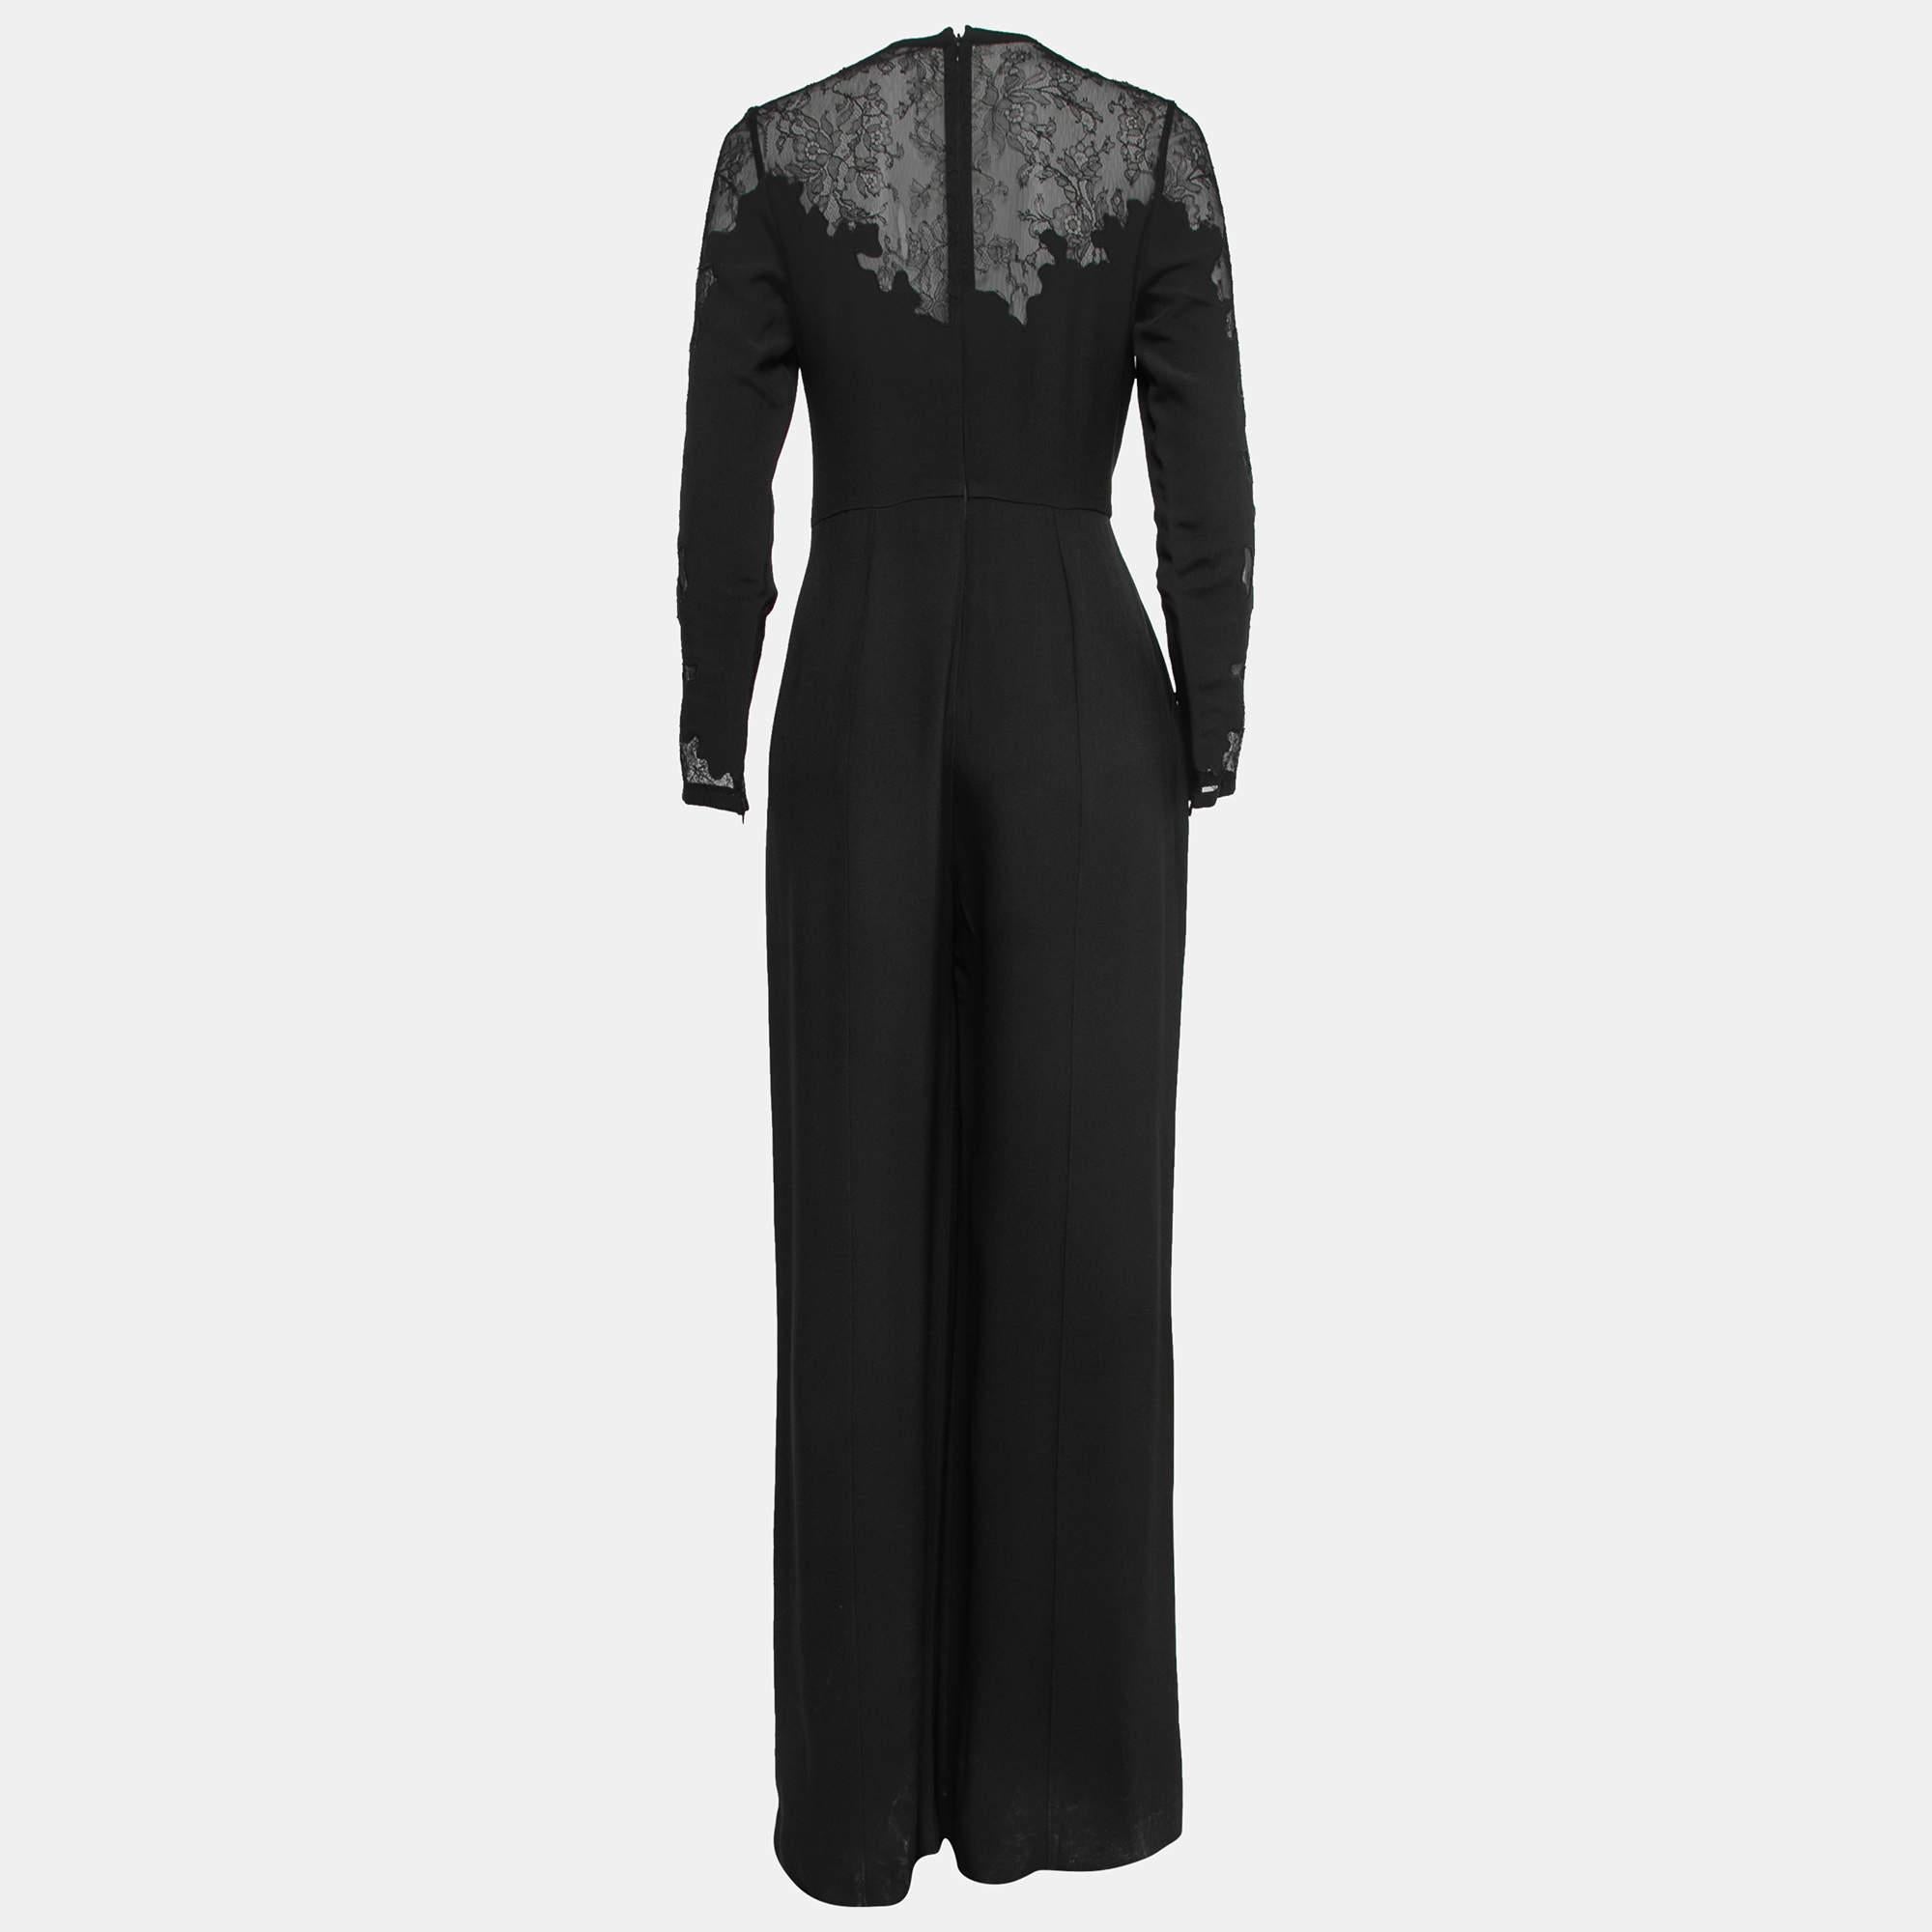 Bring in a touch of sophistication and elegance to your look by wearing this jumpsuit. A flattering neckline, classy hue, and noticeable details define this jumpsuit. Style it with high heels.

